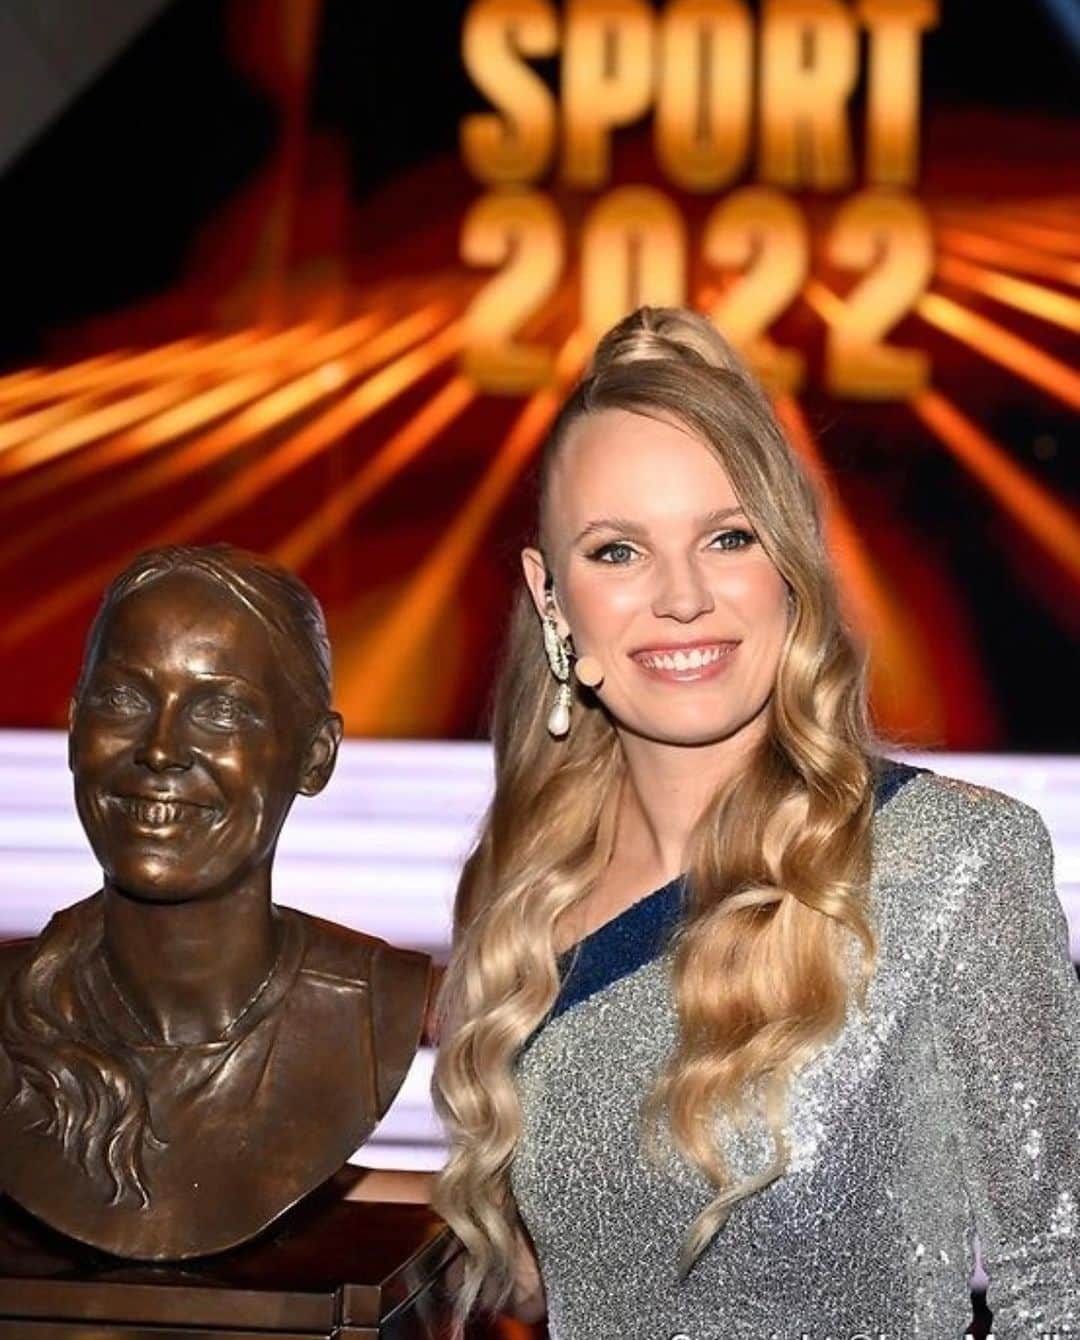 CarolineWozniackiのインスタグラム：「A very special night hosting the Sport 2022 gala, a celebration of all sports in Denmark. I was also very honored to be inducted into the Danish Sports Hall of Fame and receive the award from HRH Crown Prince Frederik.  What a night! Thank you for all the support!🇩🇰  📸 Lars Møller 👗: @jesperhovring」